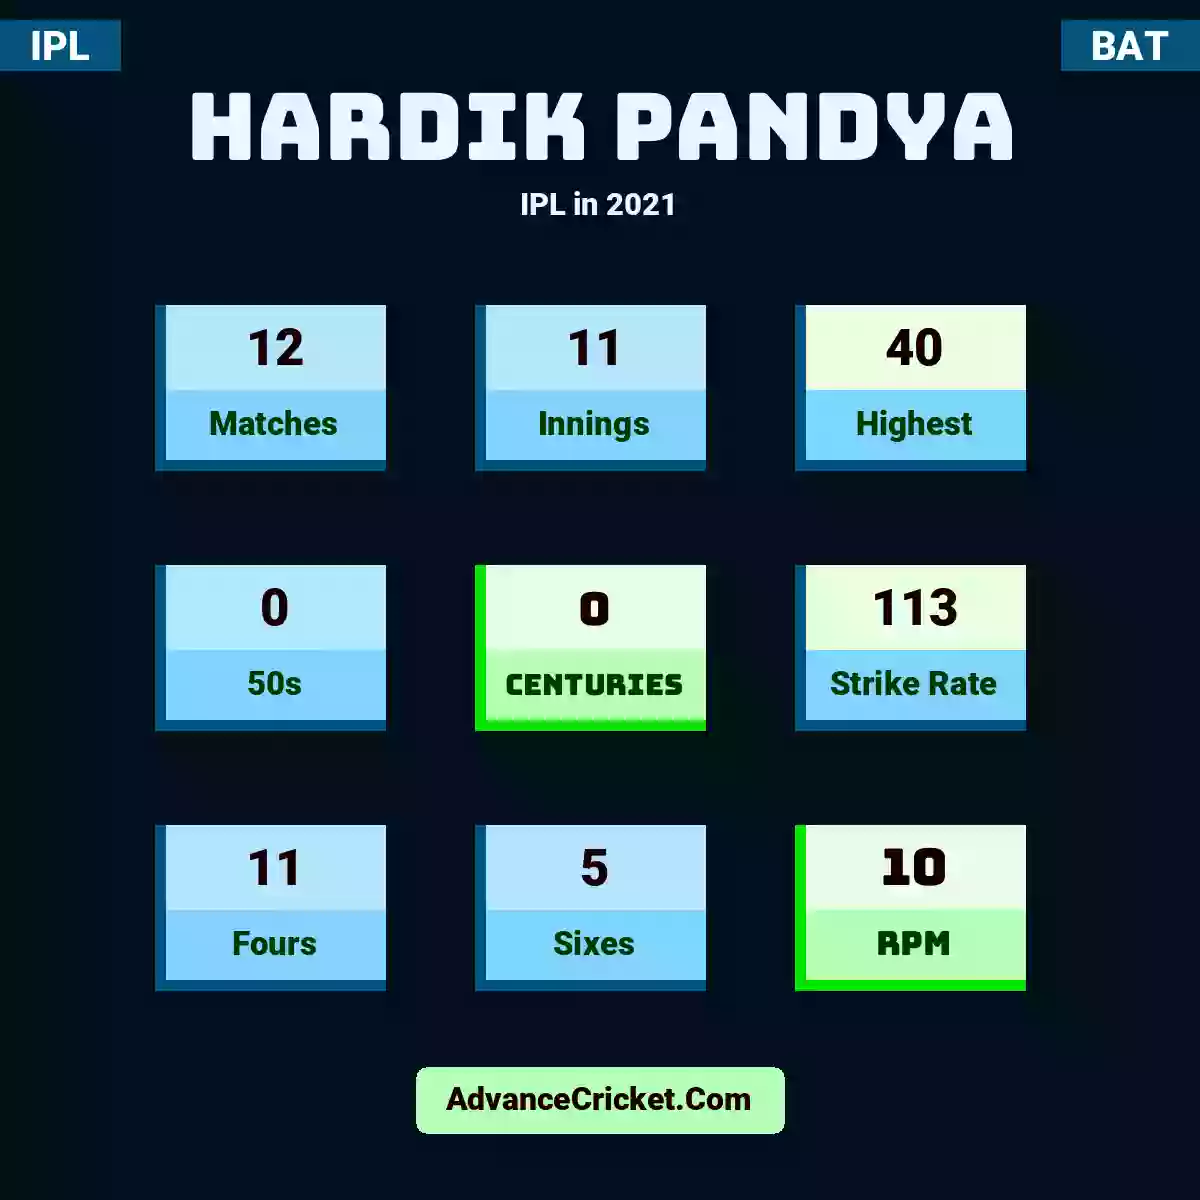 Hardik Pandya IPL  in 2021, Hardik Pandya played 12 matches, scored 40 runs as highest, 0 half-centuries, and 0 centuries, with a strike rate of 113. H.Pandya hit 11 fours and 5 sixes, with an RPM of 10.